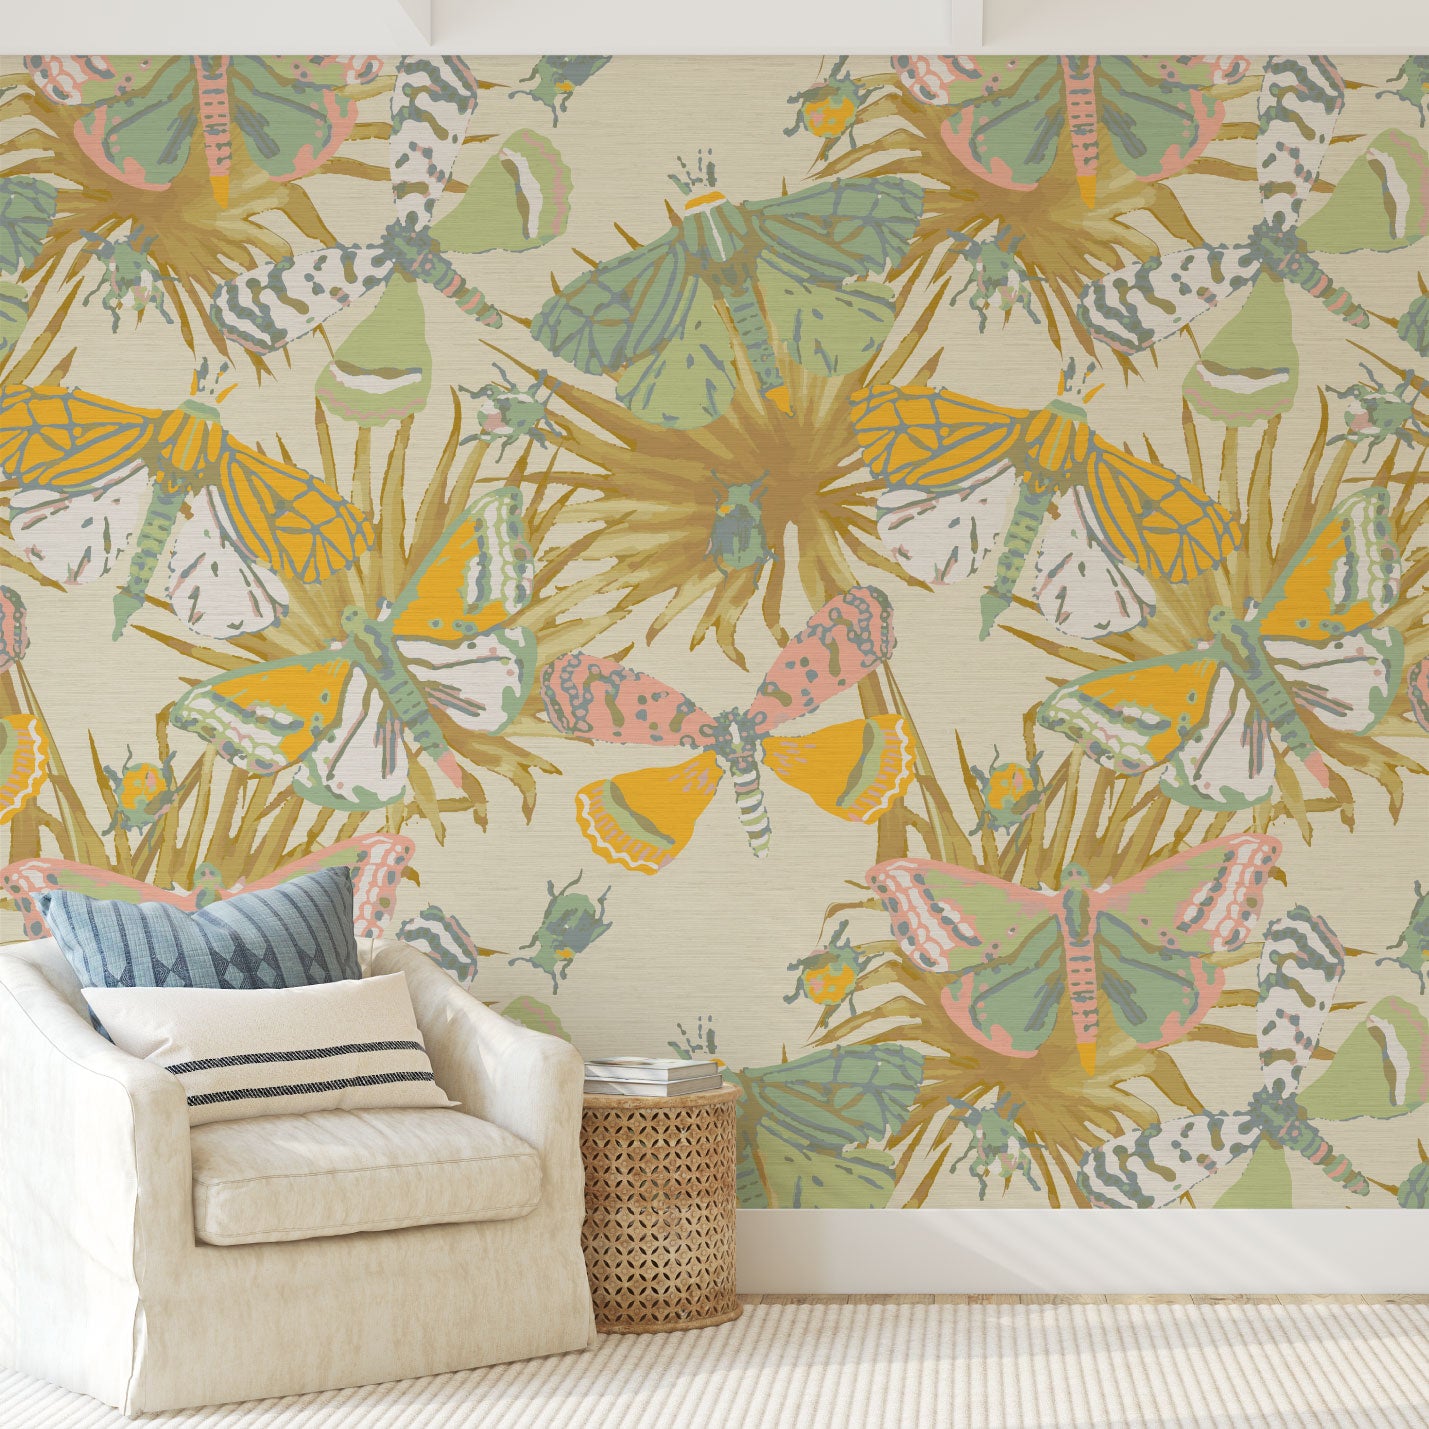 grasscloth printed wallpaper with pale blue base and subtle olive, tan and brown palm leafs as base print with oversized multi colored butterflies layered on top. Butterflies and bugs are designed using a range of pastel pinks, light olive, dusty blue, gold and off white.